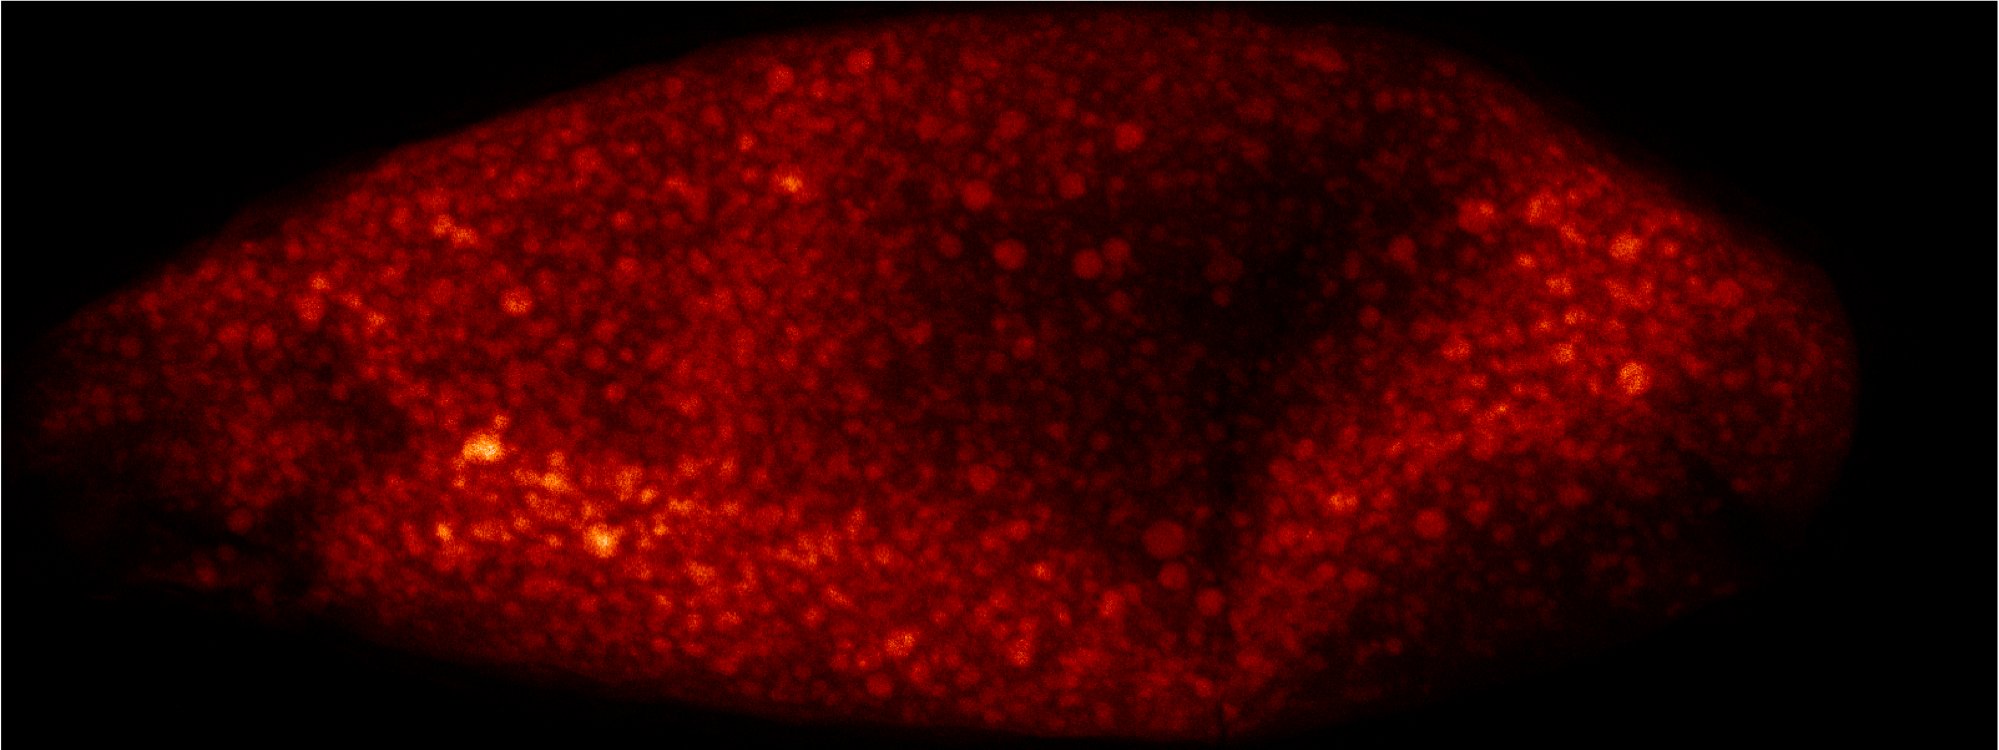 X-ray fluorescence microscopy image showing the distribution of an element in fruit fly oocyte